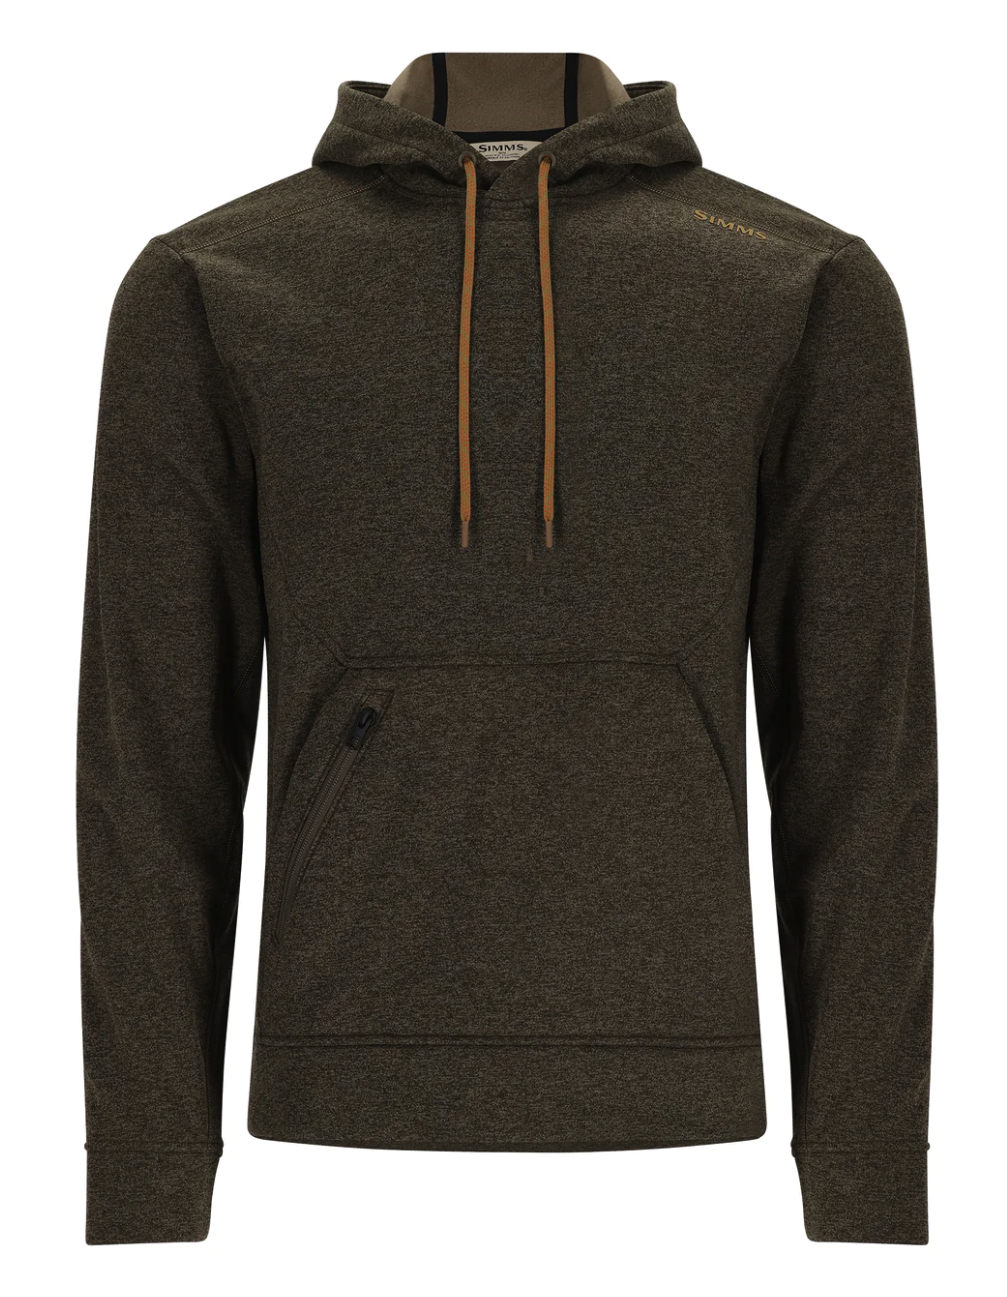 Buy Simms CX Hoody online at The Fly Fishers.